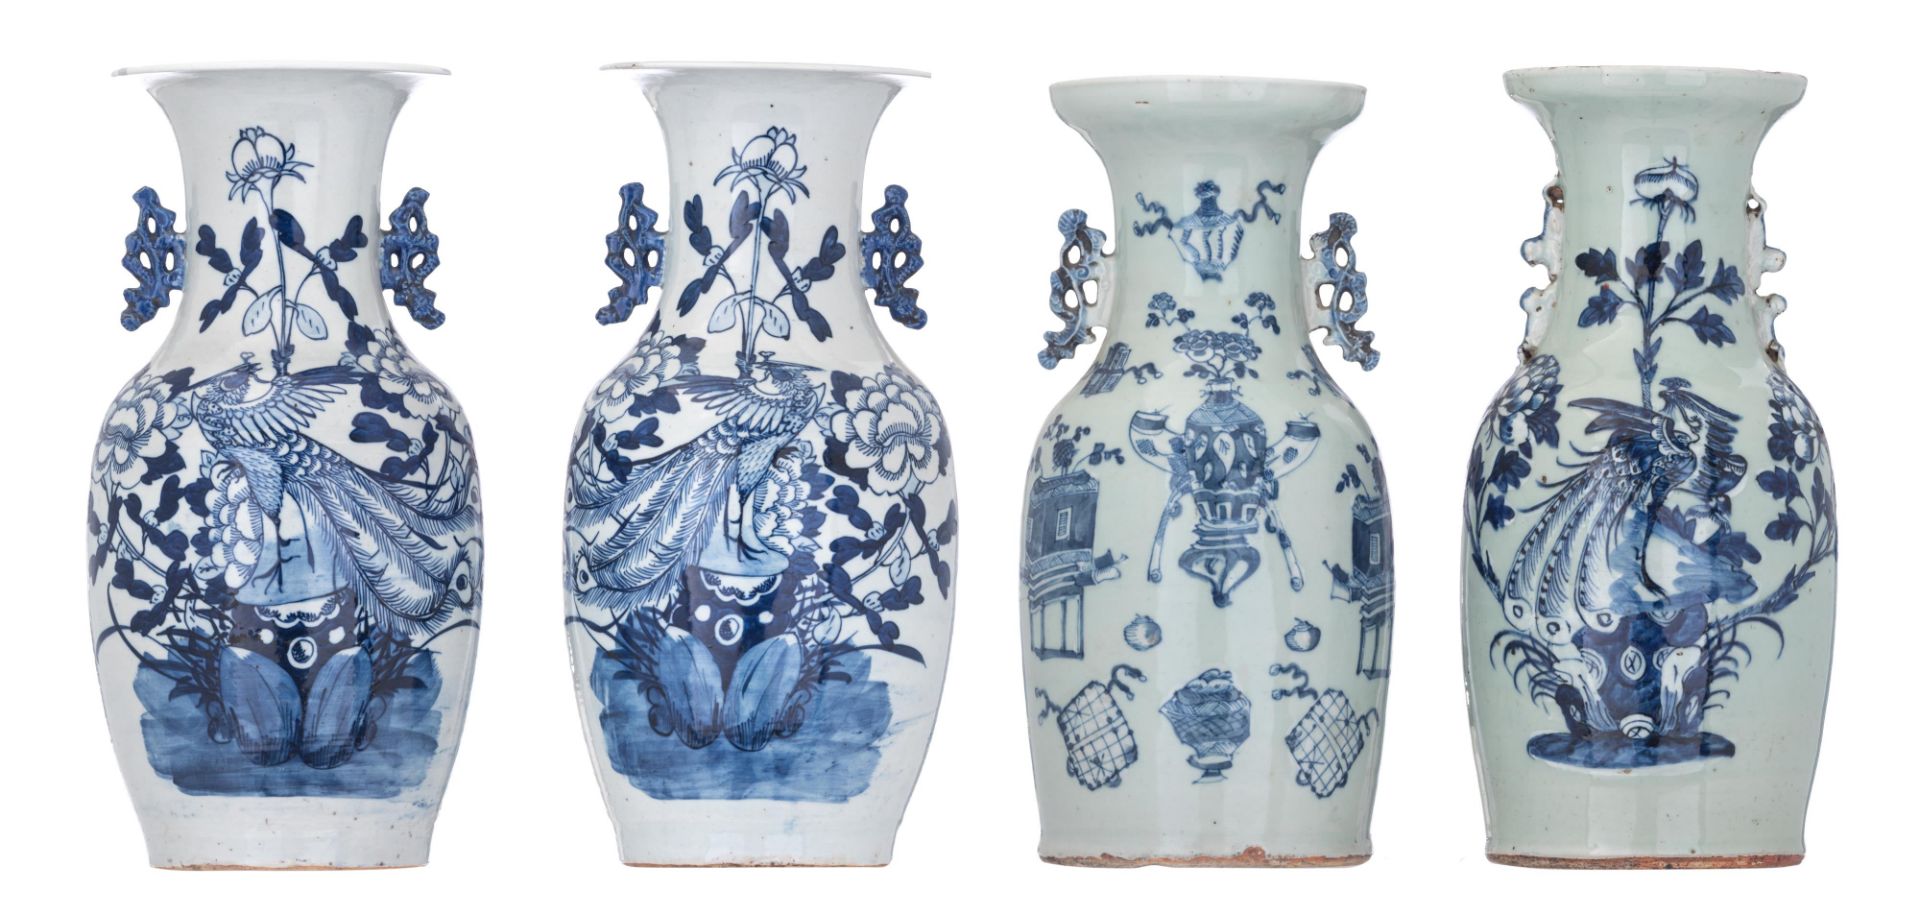 Four Chinese blue and white on celadon ground vases, late 19thC, H 42 - 43 cm